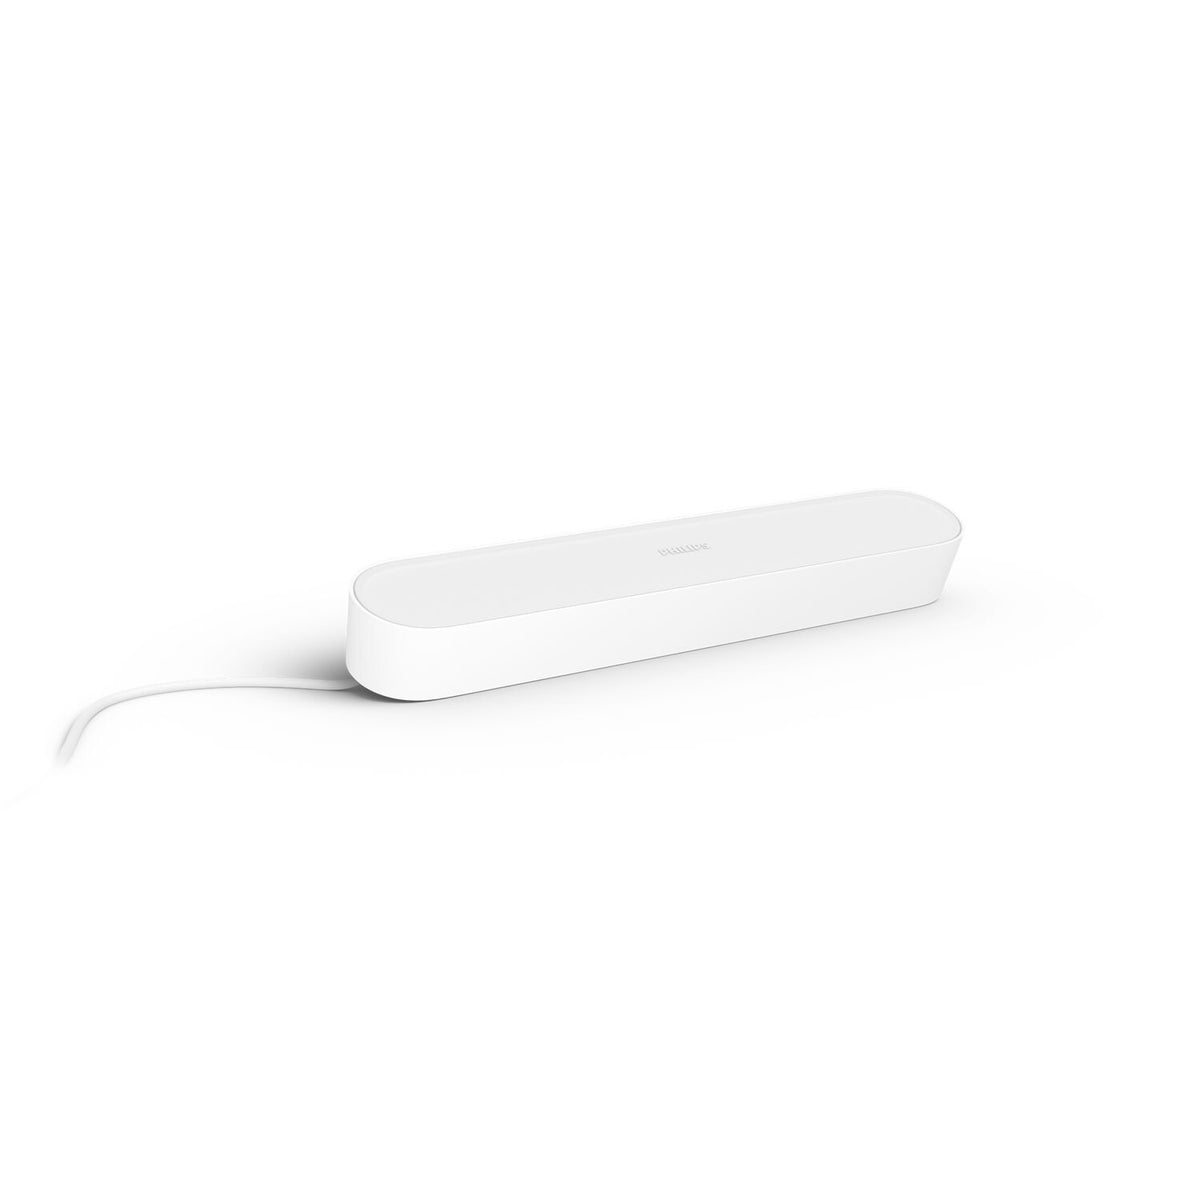 Philips Hue Play light bar Extension Pack in White - White and colour ambience (Pack of 1)